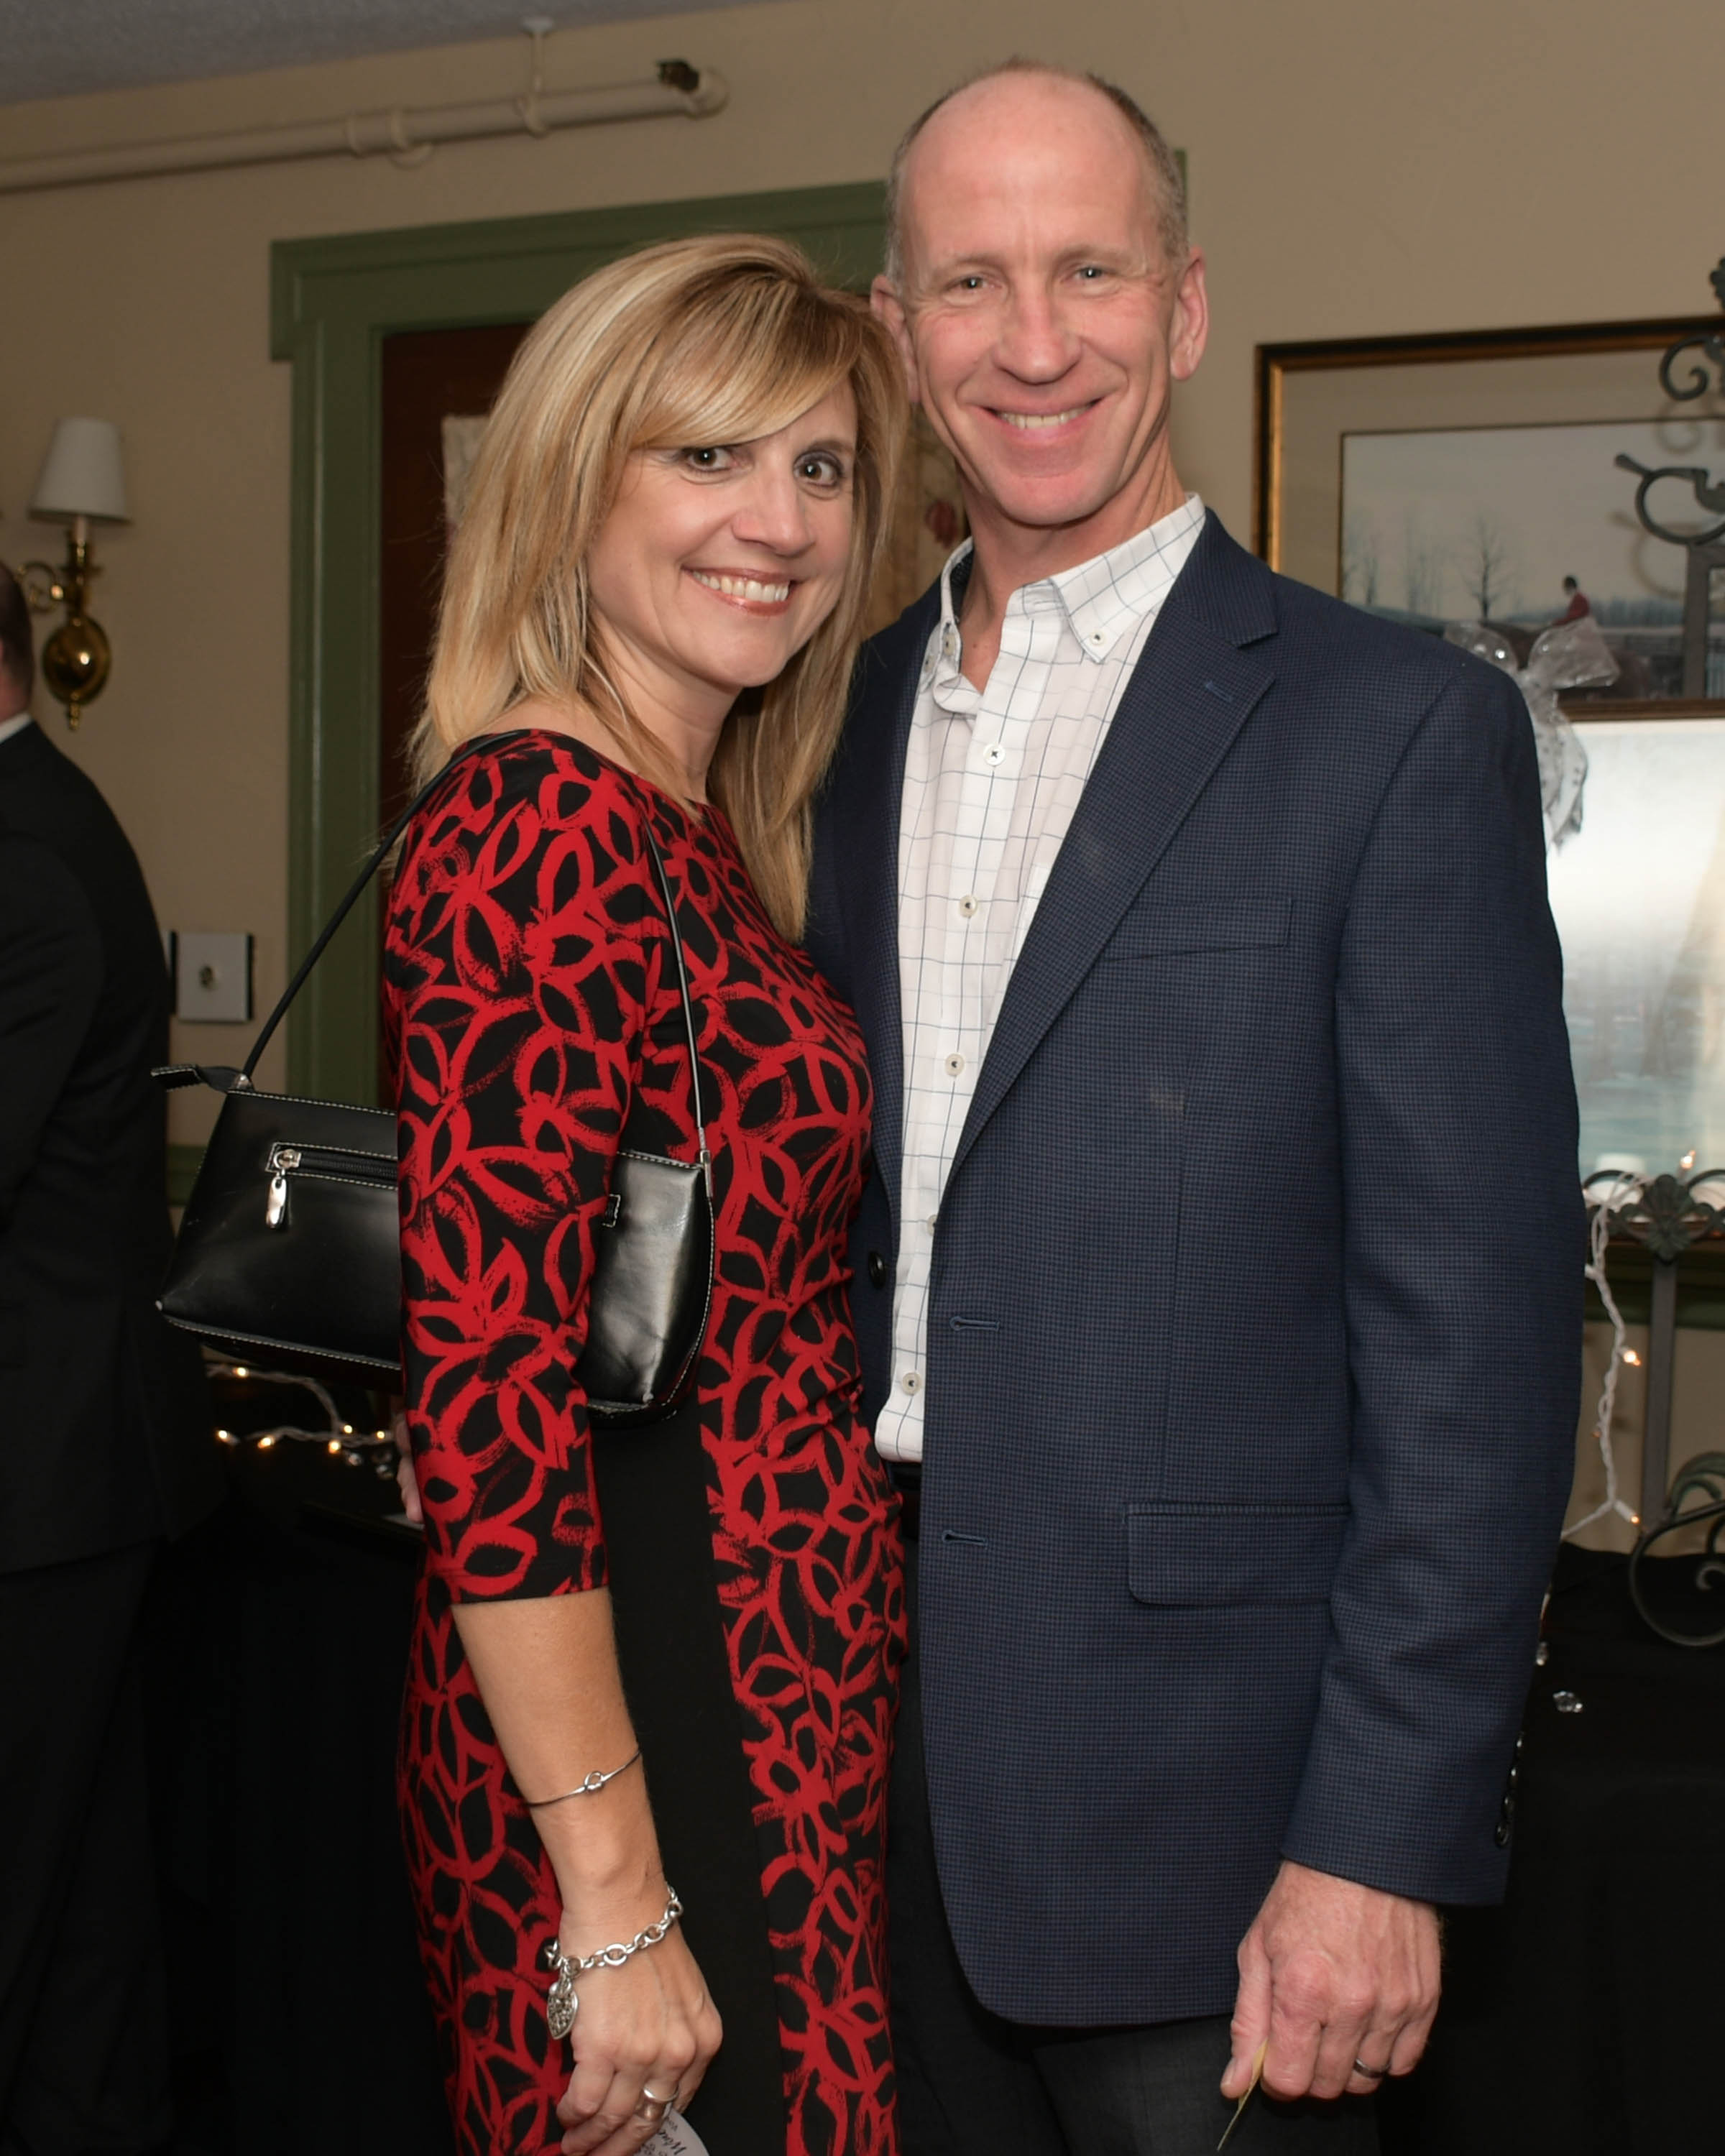 Vin Le Soir to benefit AIM Services, Inc. couple at event in suit and red dress